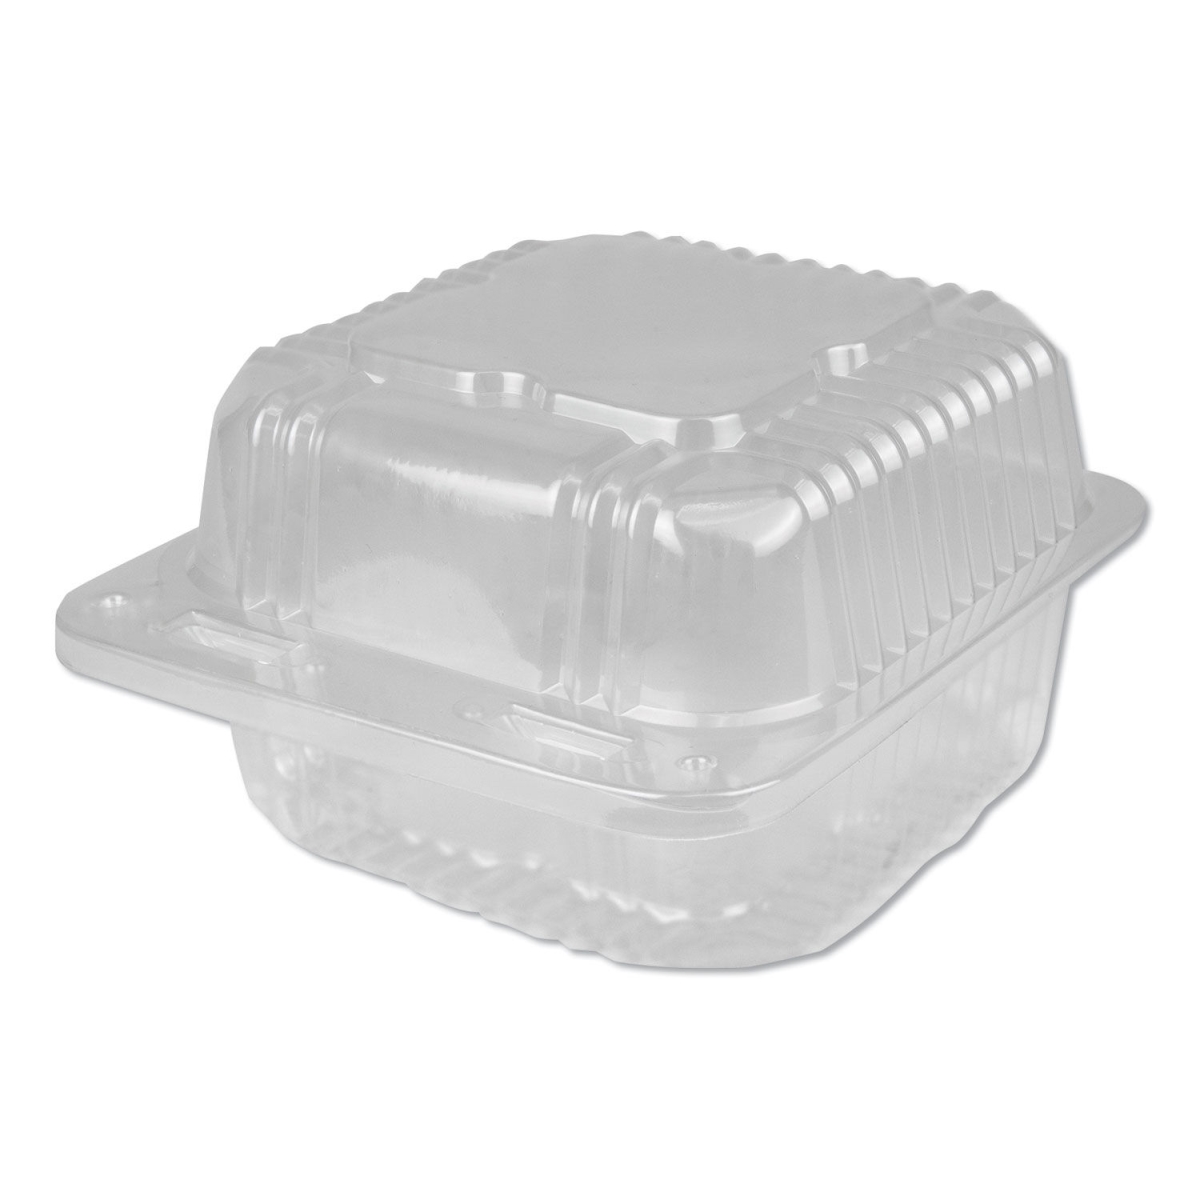 Dpkpxt505 12 Oz 5 X 5 In. Plastic Hinged Containers, Clear